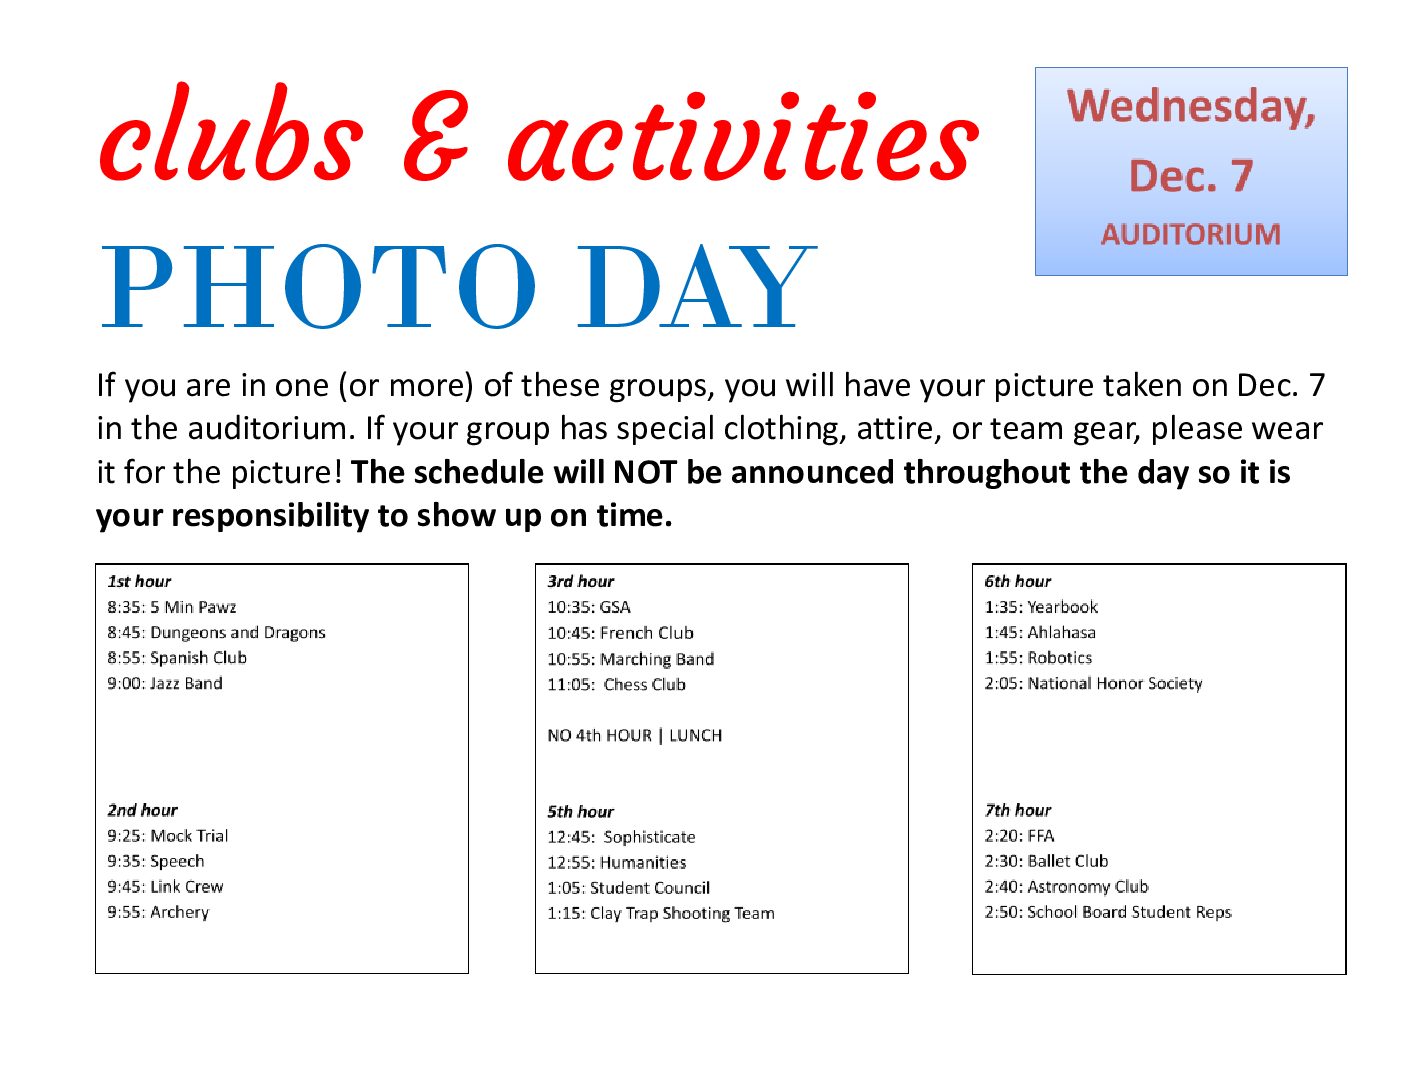 Clubs and Activities Photo Day Schedule